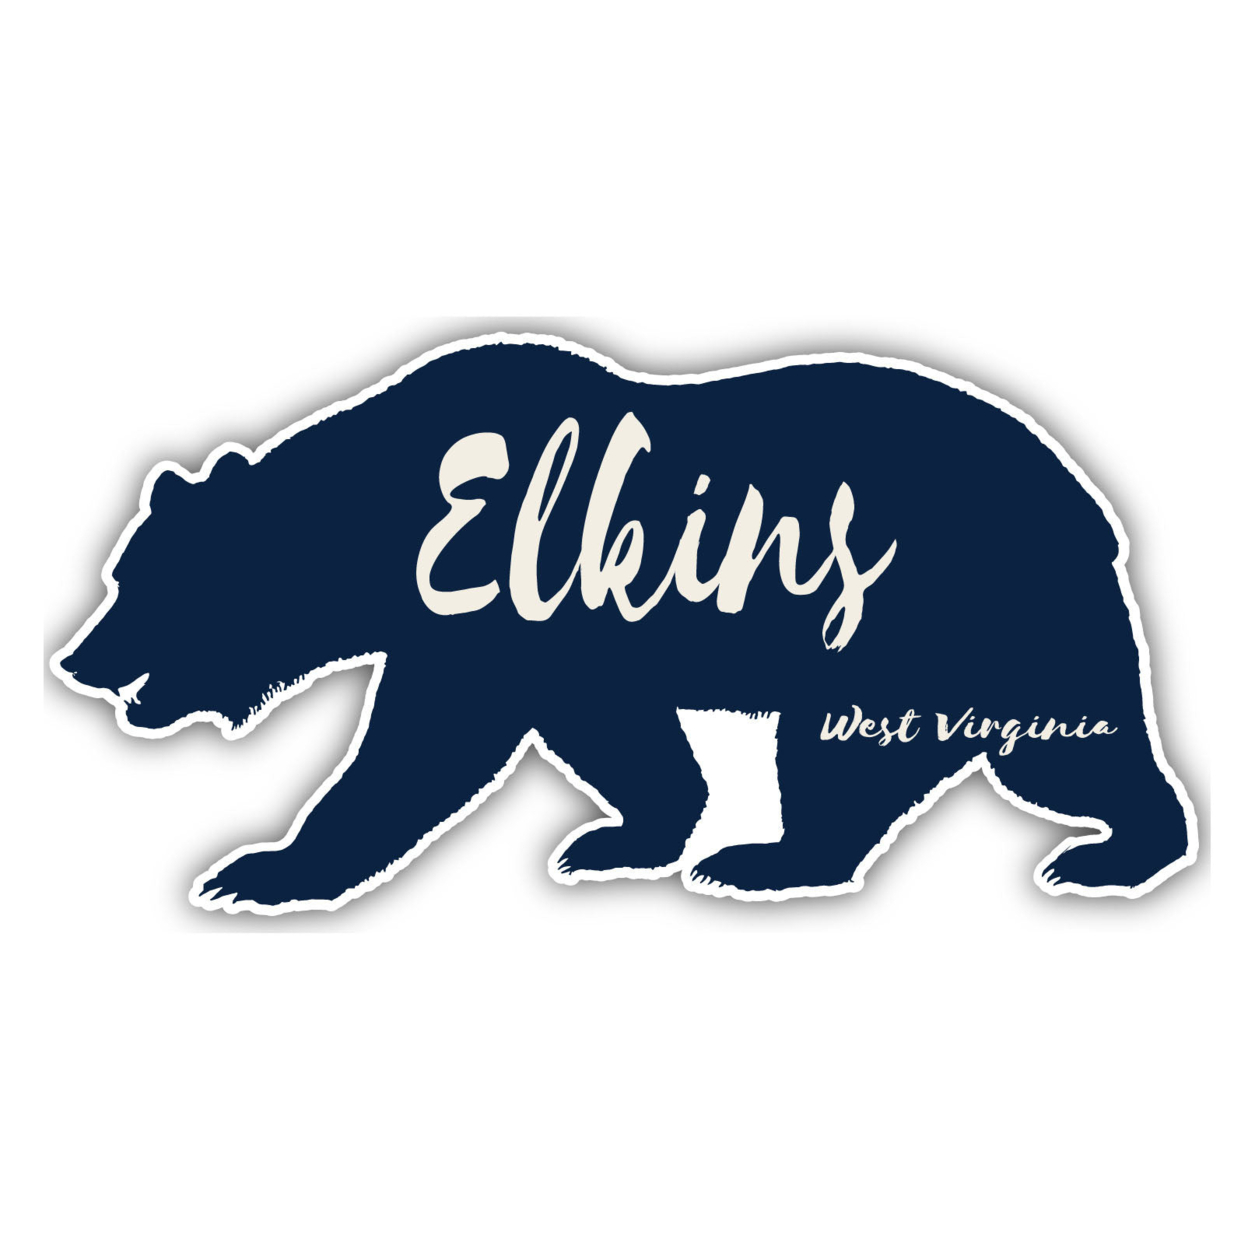 Elkins West Virginia Souvenir Decorative Stickers (Choose Theme And Size) - 4-Pack, 12-Inch, Bear